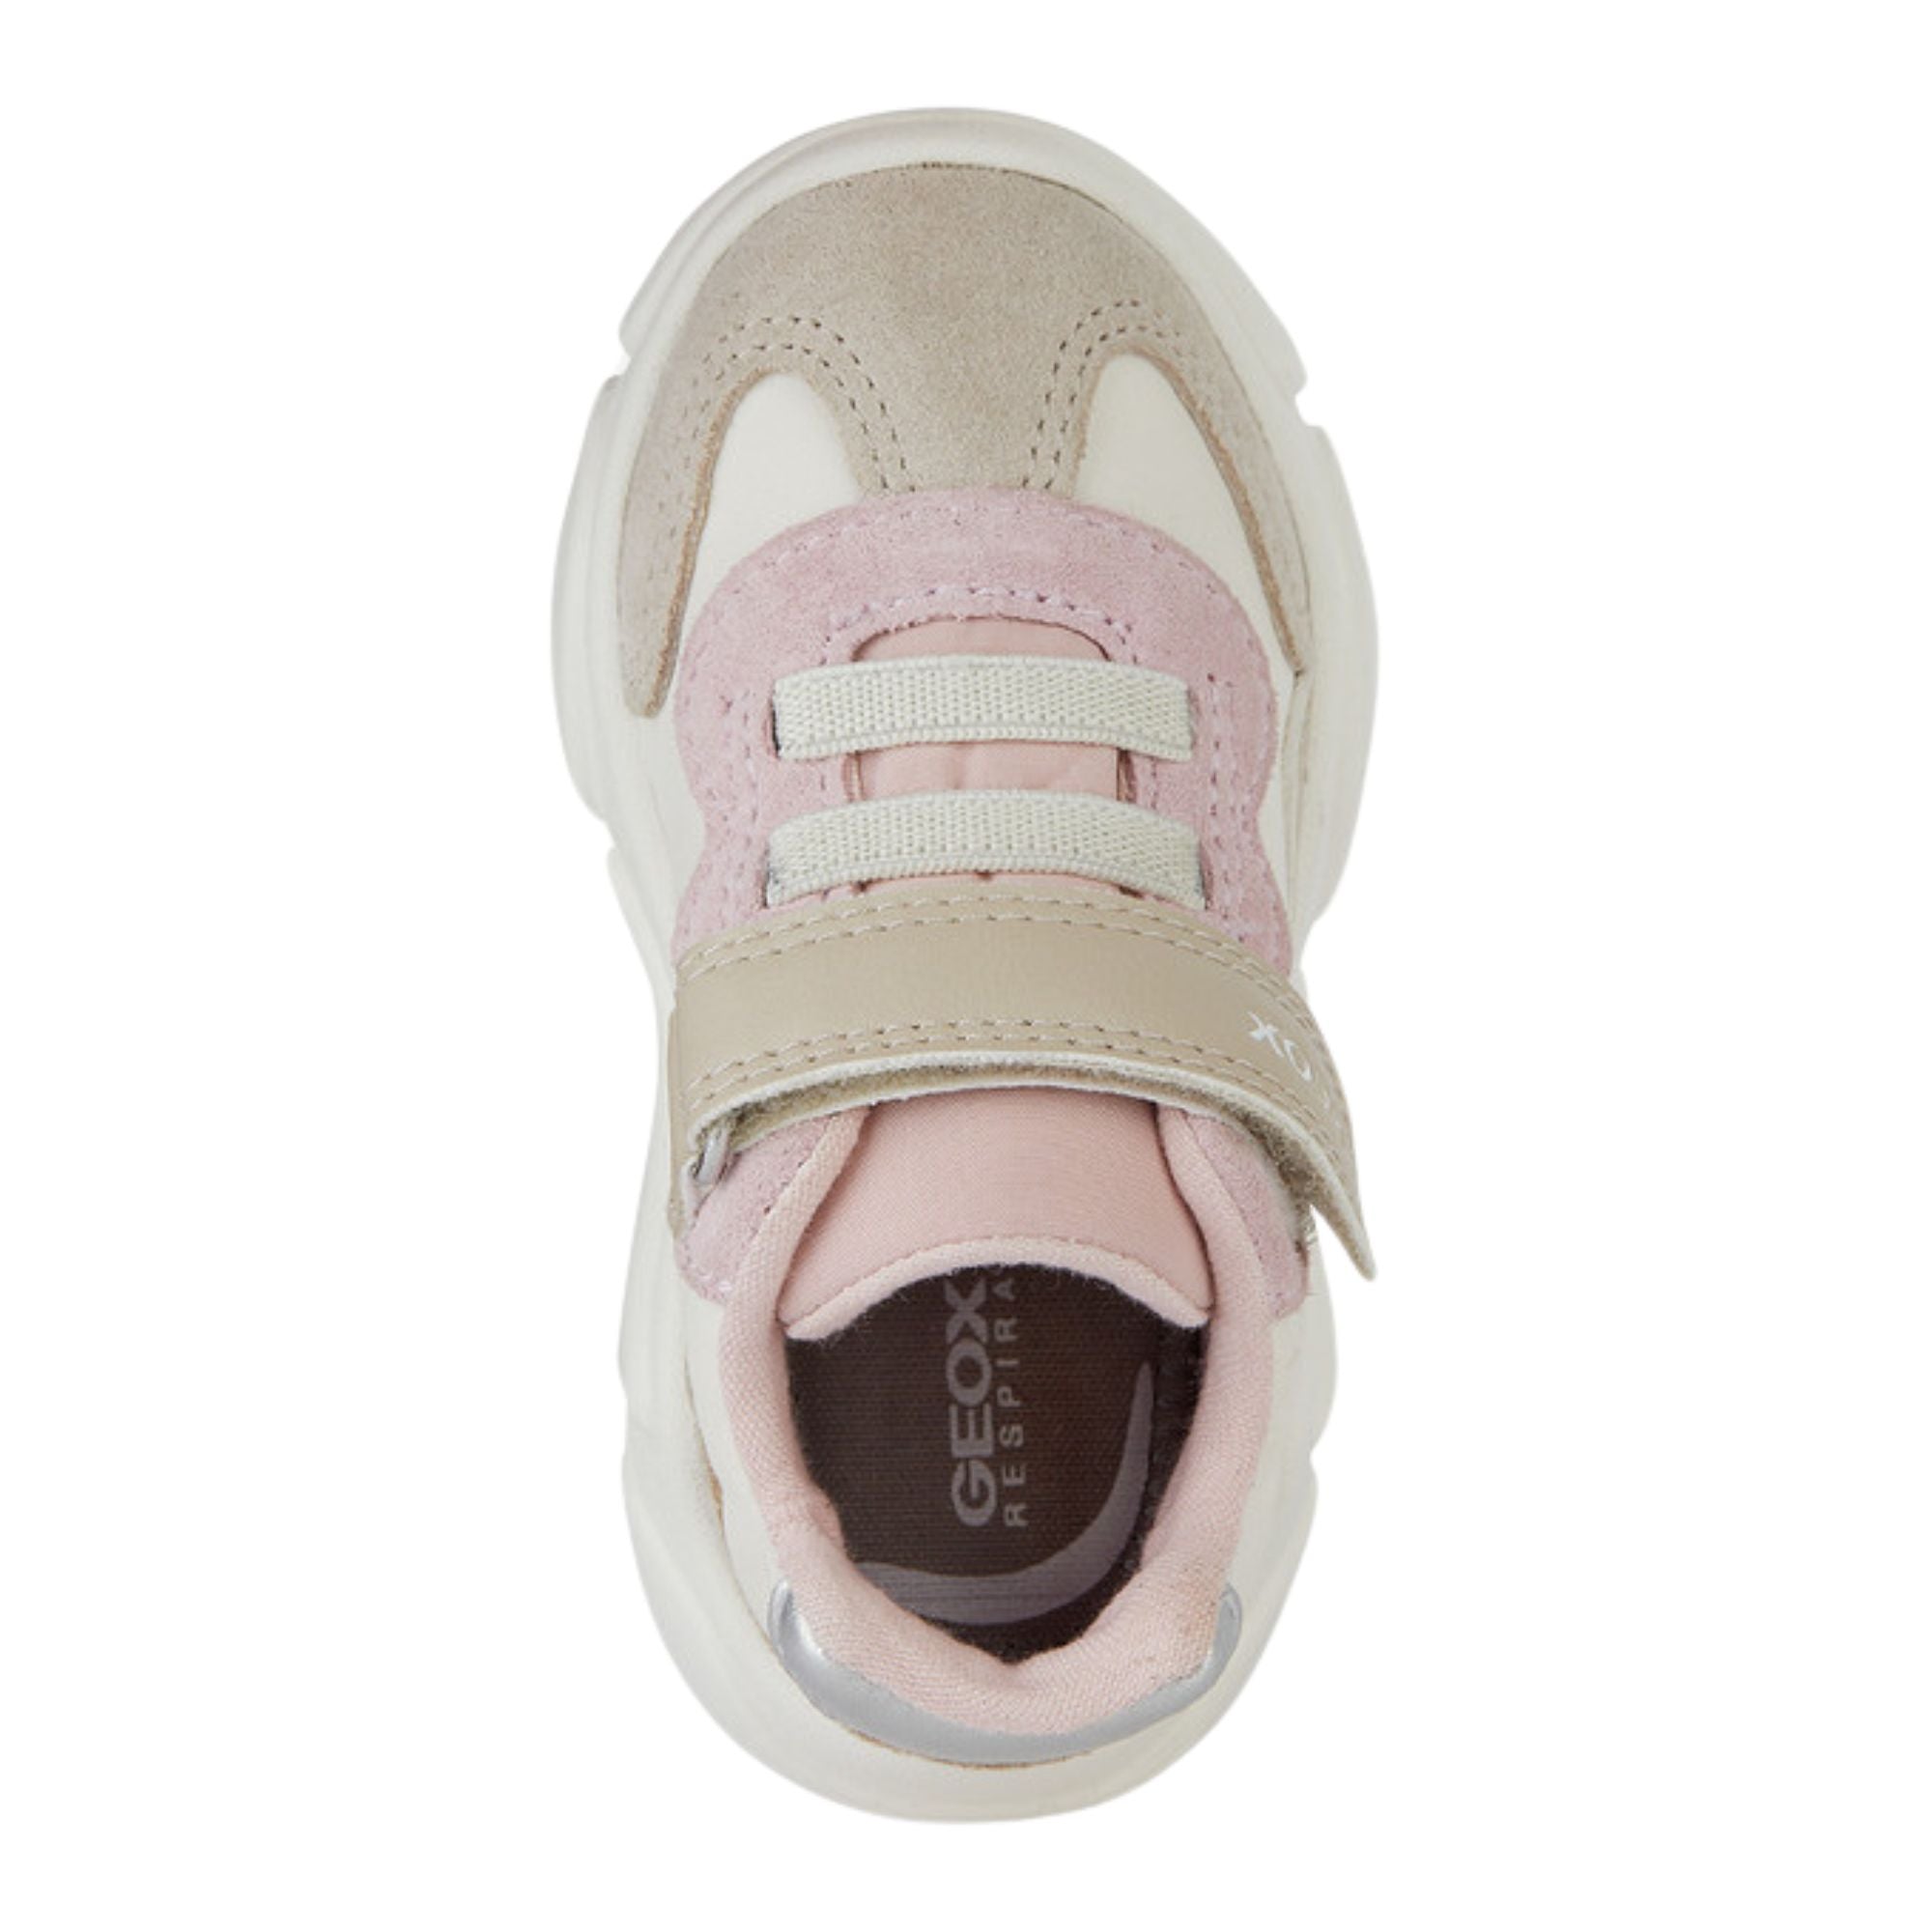 Geox Baby Girl Ciufciuf Ivory Sneakers